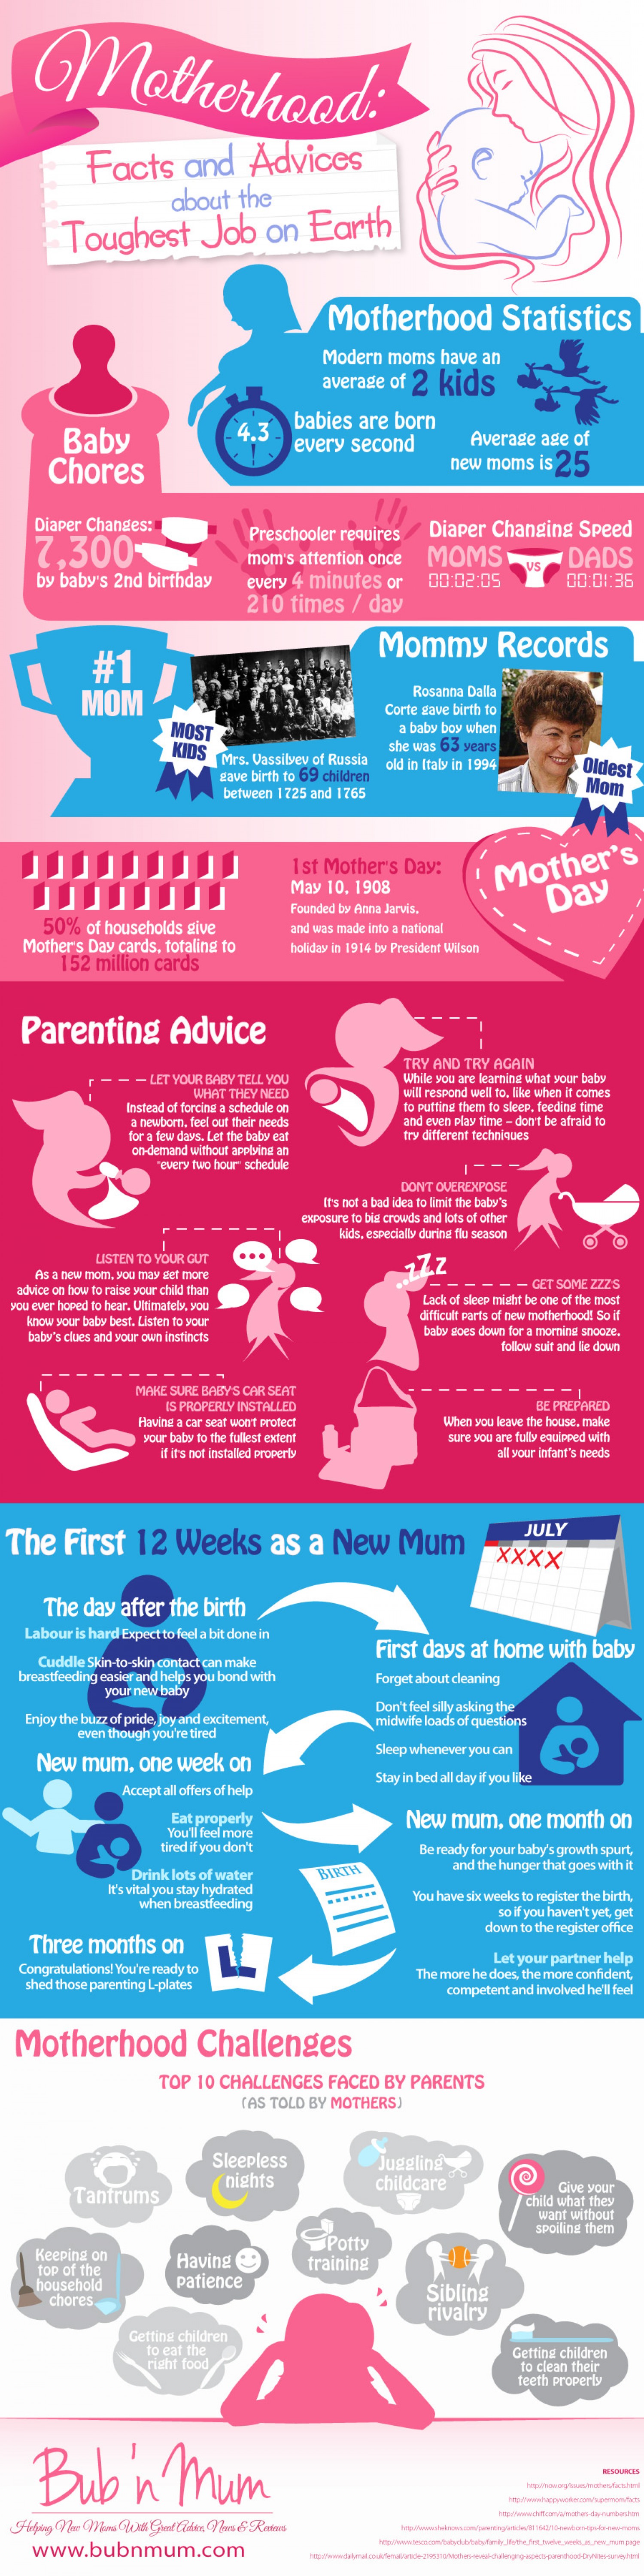 07 motherhood-facts-and-advices-about-the-toughest-job-on-earth_52d37731d2667_w1500